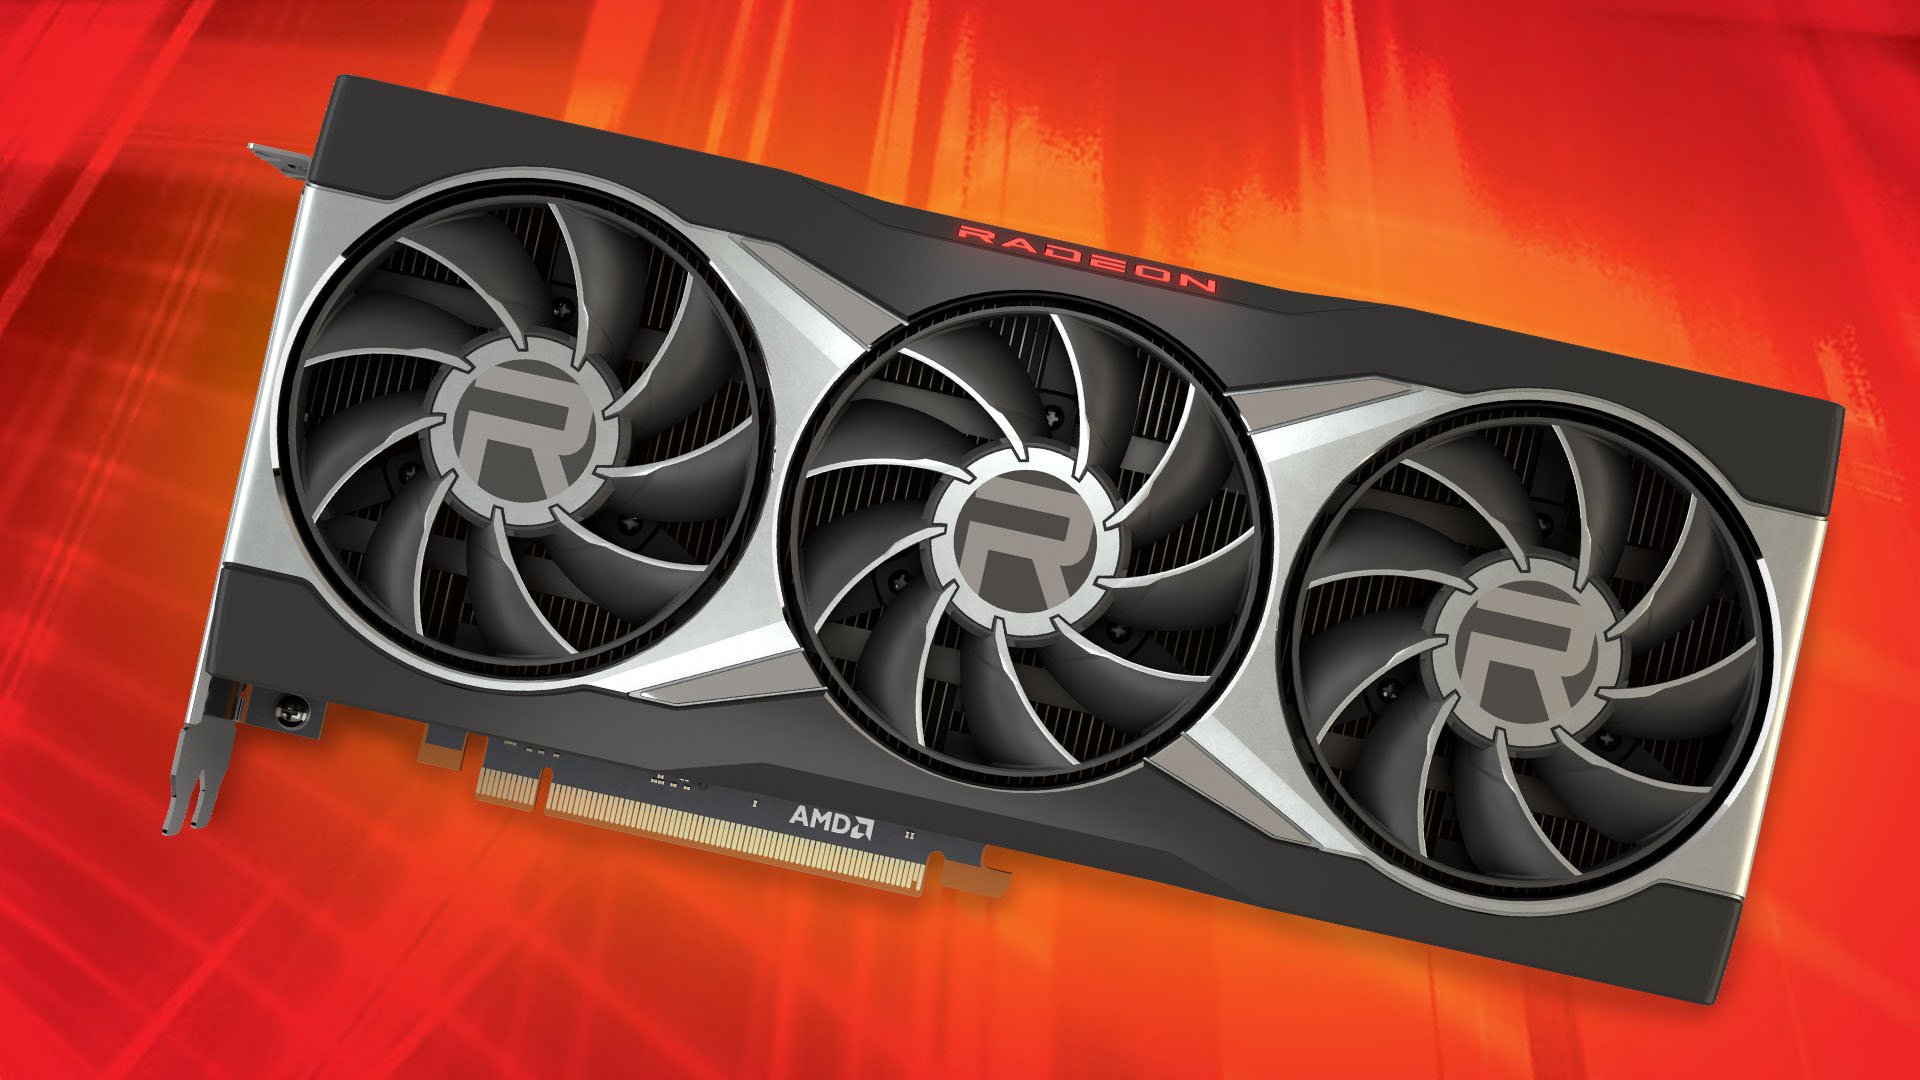 Tested: 5 things to know about AMD's Radeon RX 6800 and 6800 XT